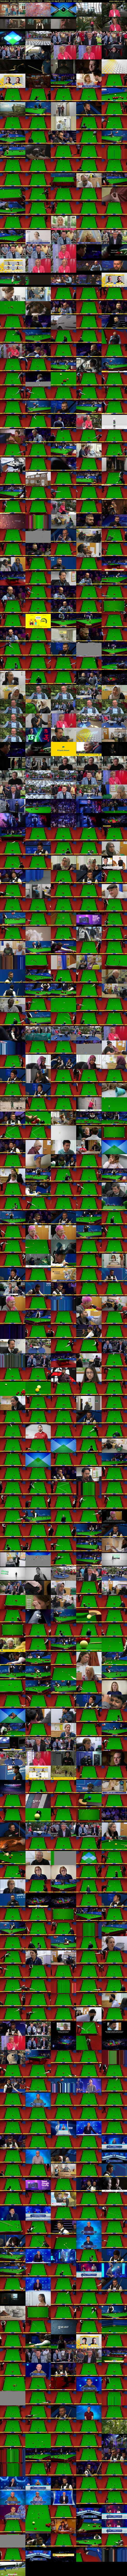 Snooker: World Championship (BBC TWO) Friday 22 April 2022 13:00 - 18:00